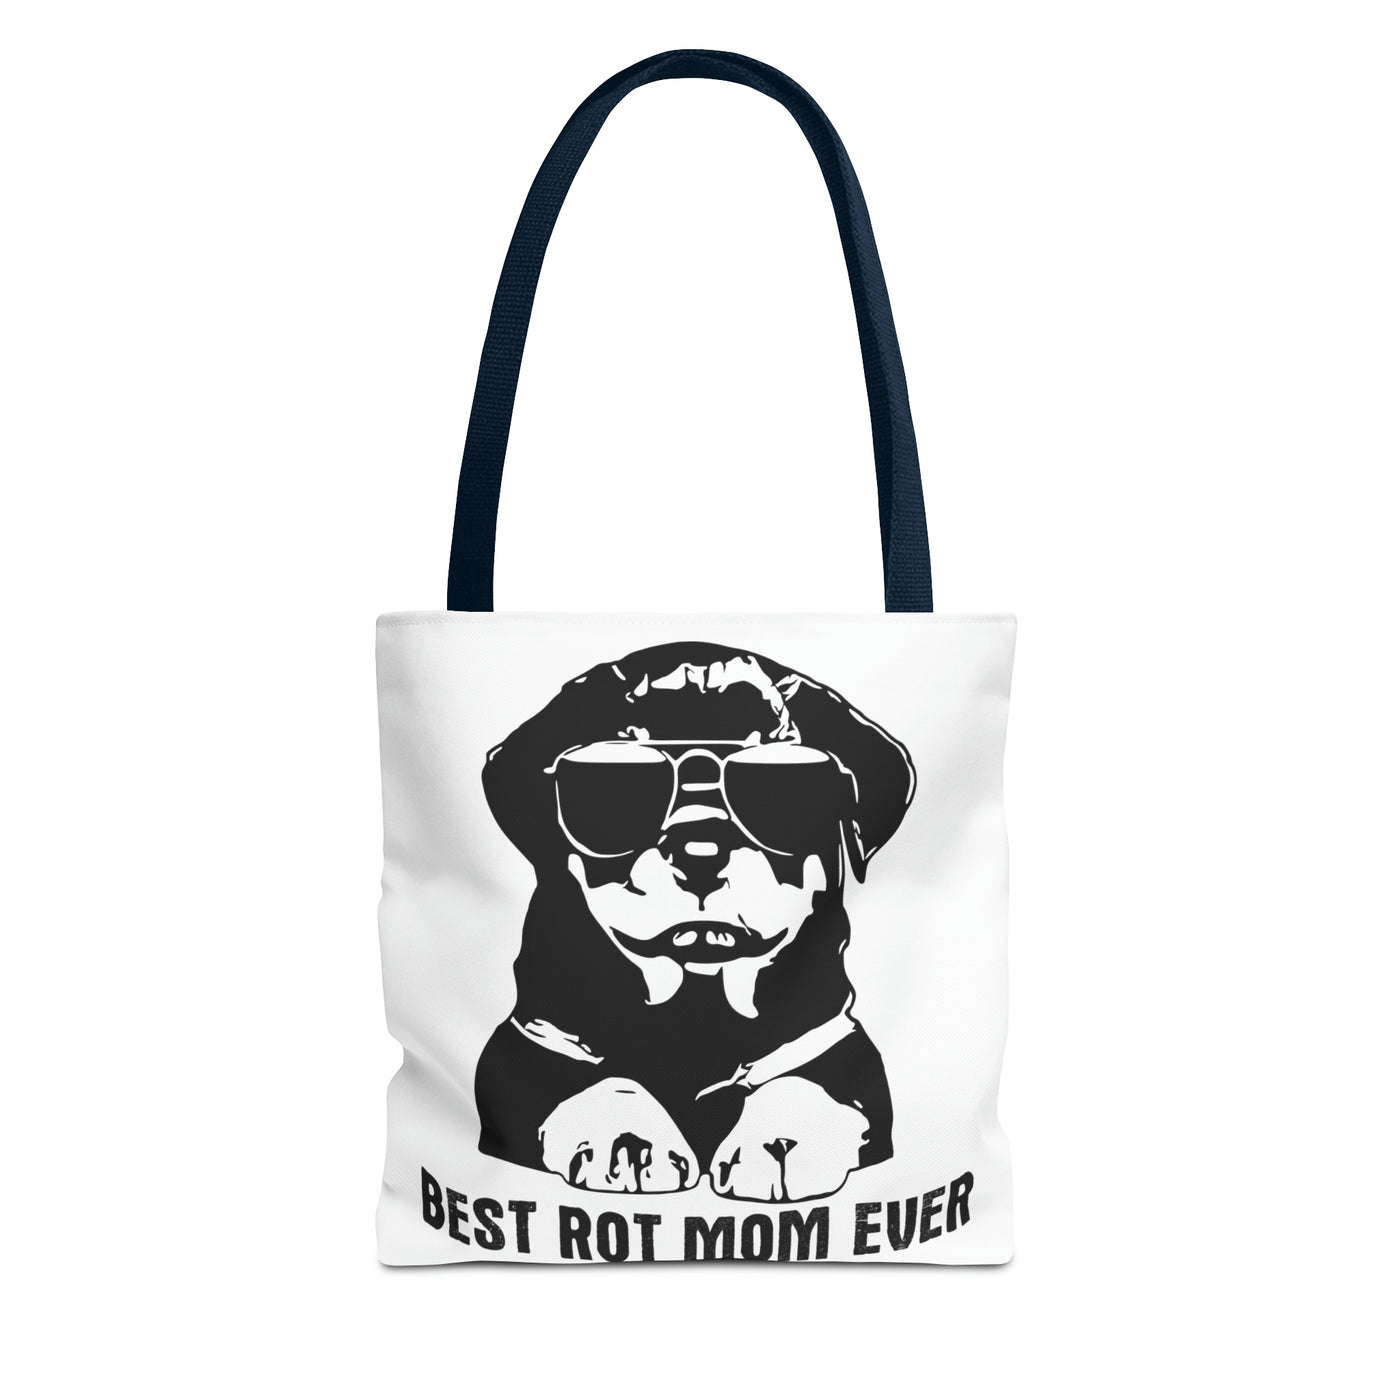 Best Rot Mom Ever Tote Bag